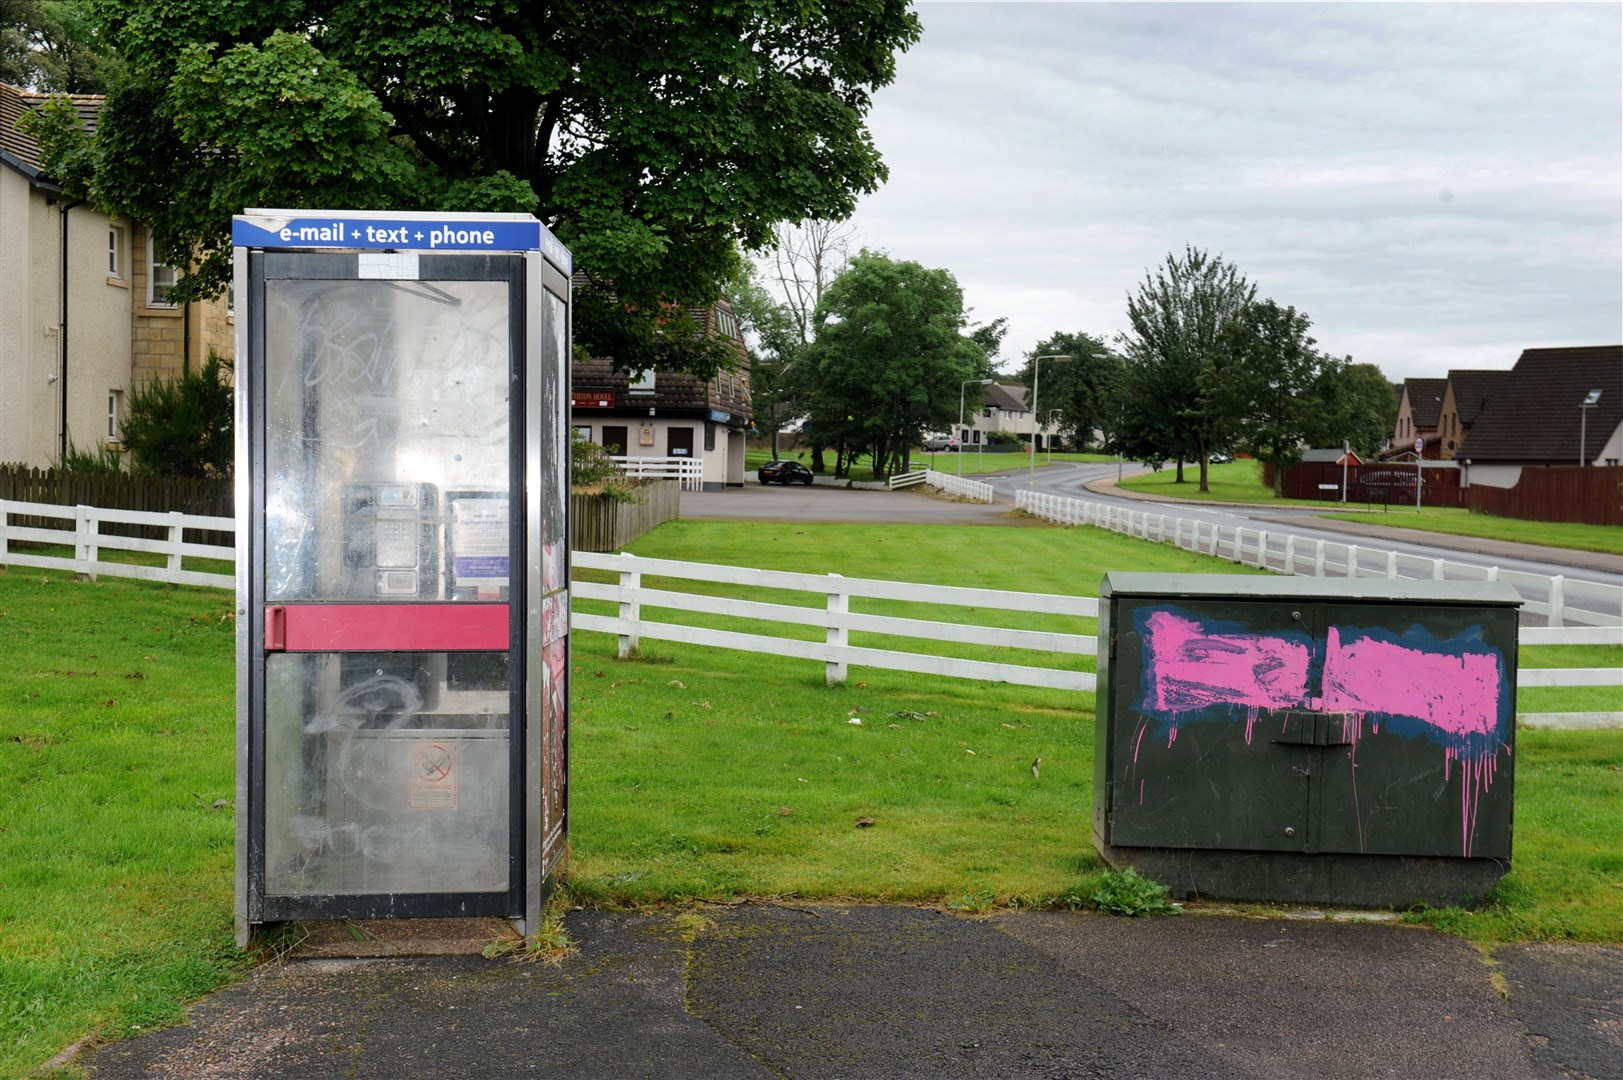 The payphone in Smithton was earmarked for removal.